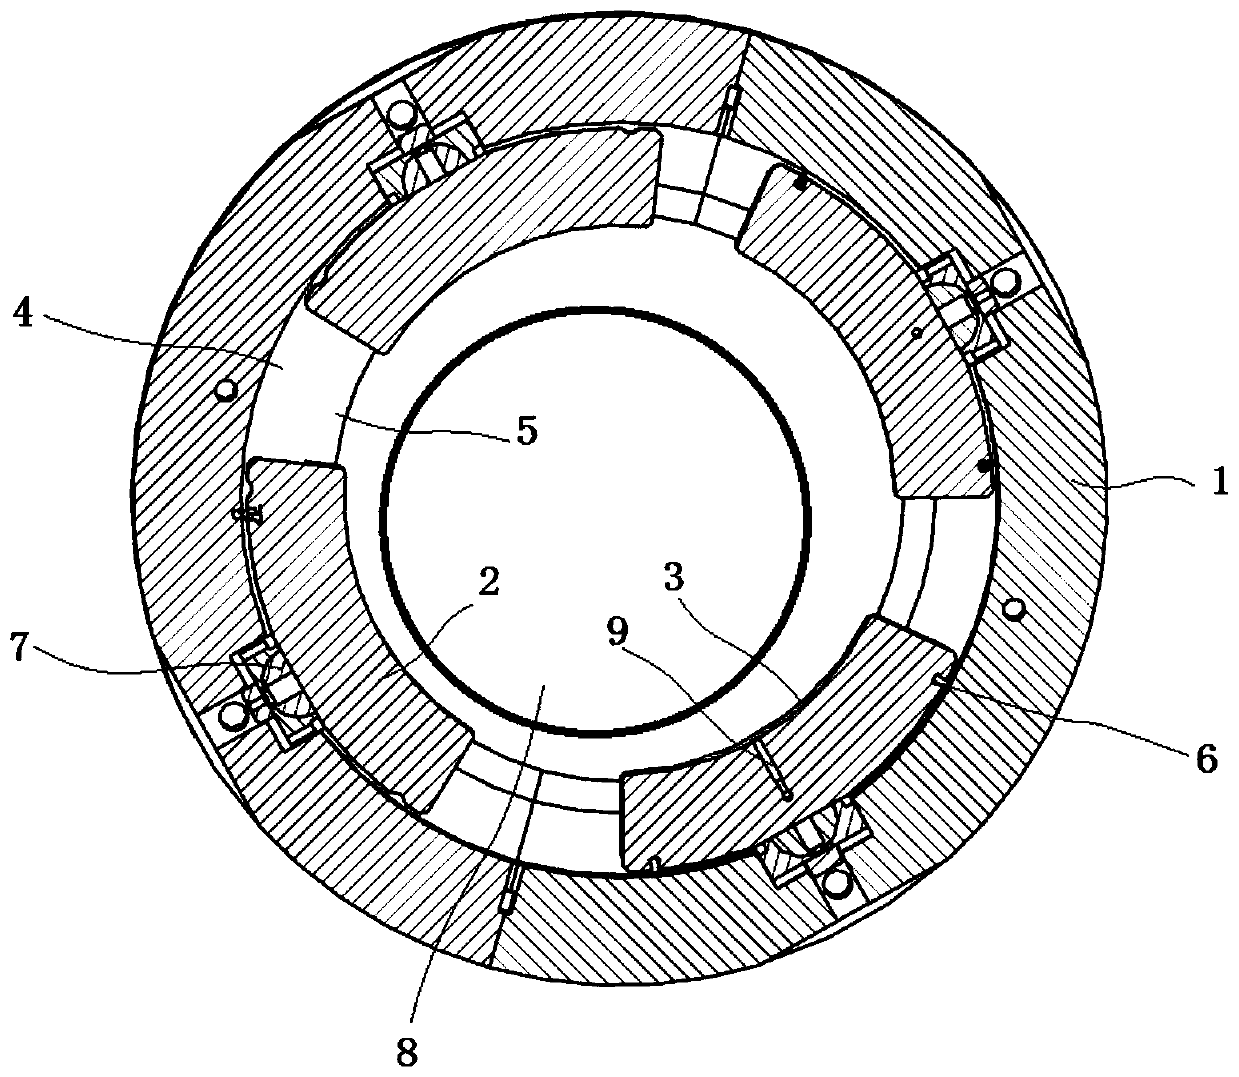 A Bearing Structure Using Supercritical Carbon Dioxide Lubrication